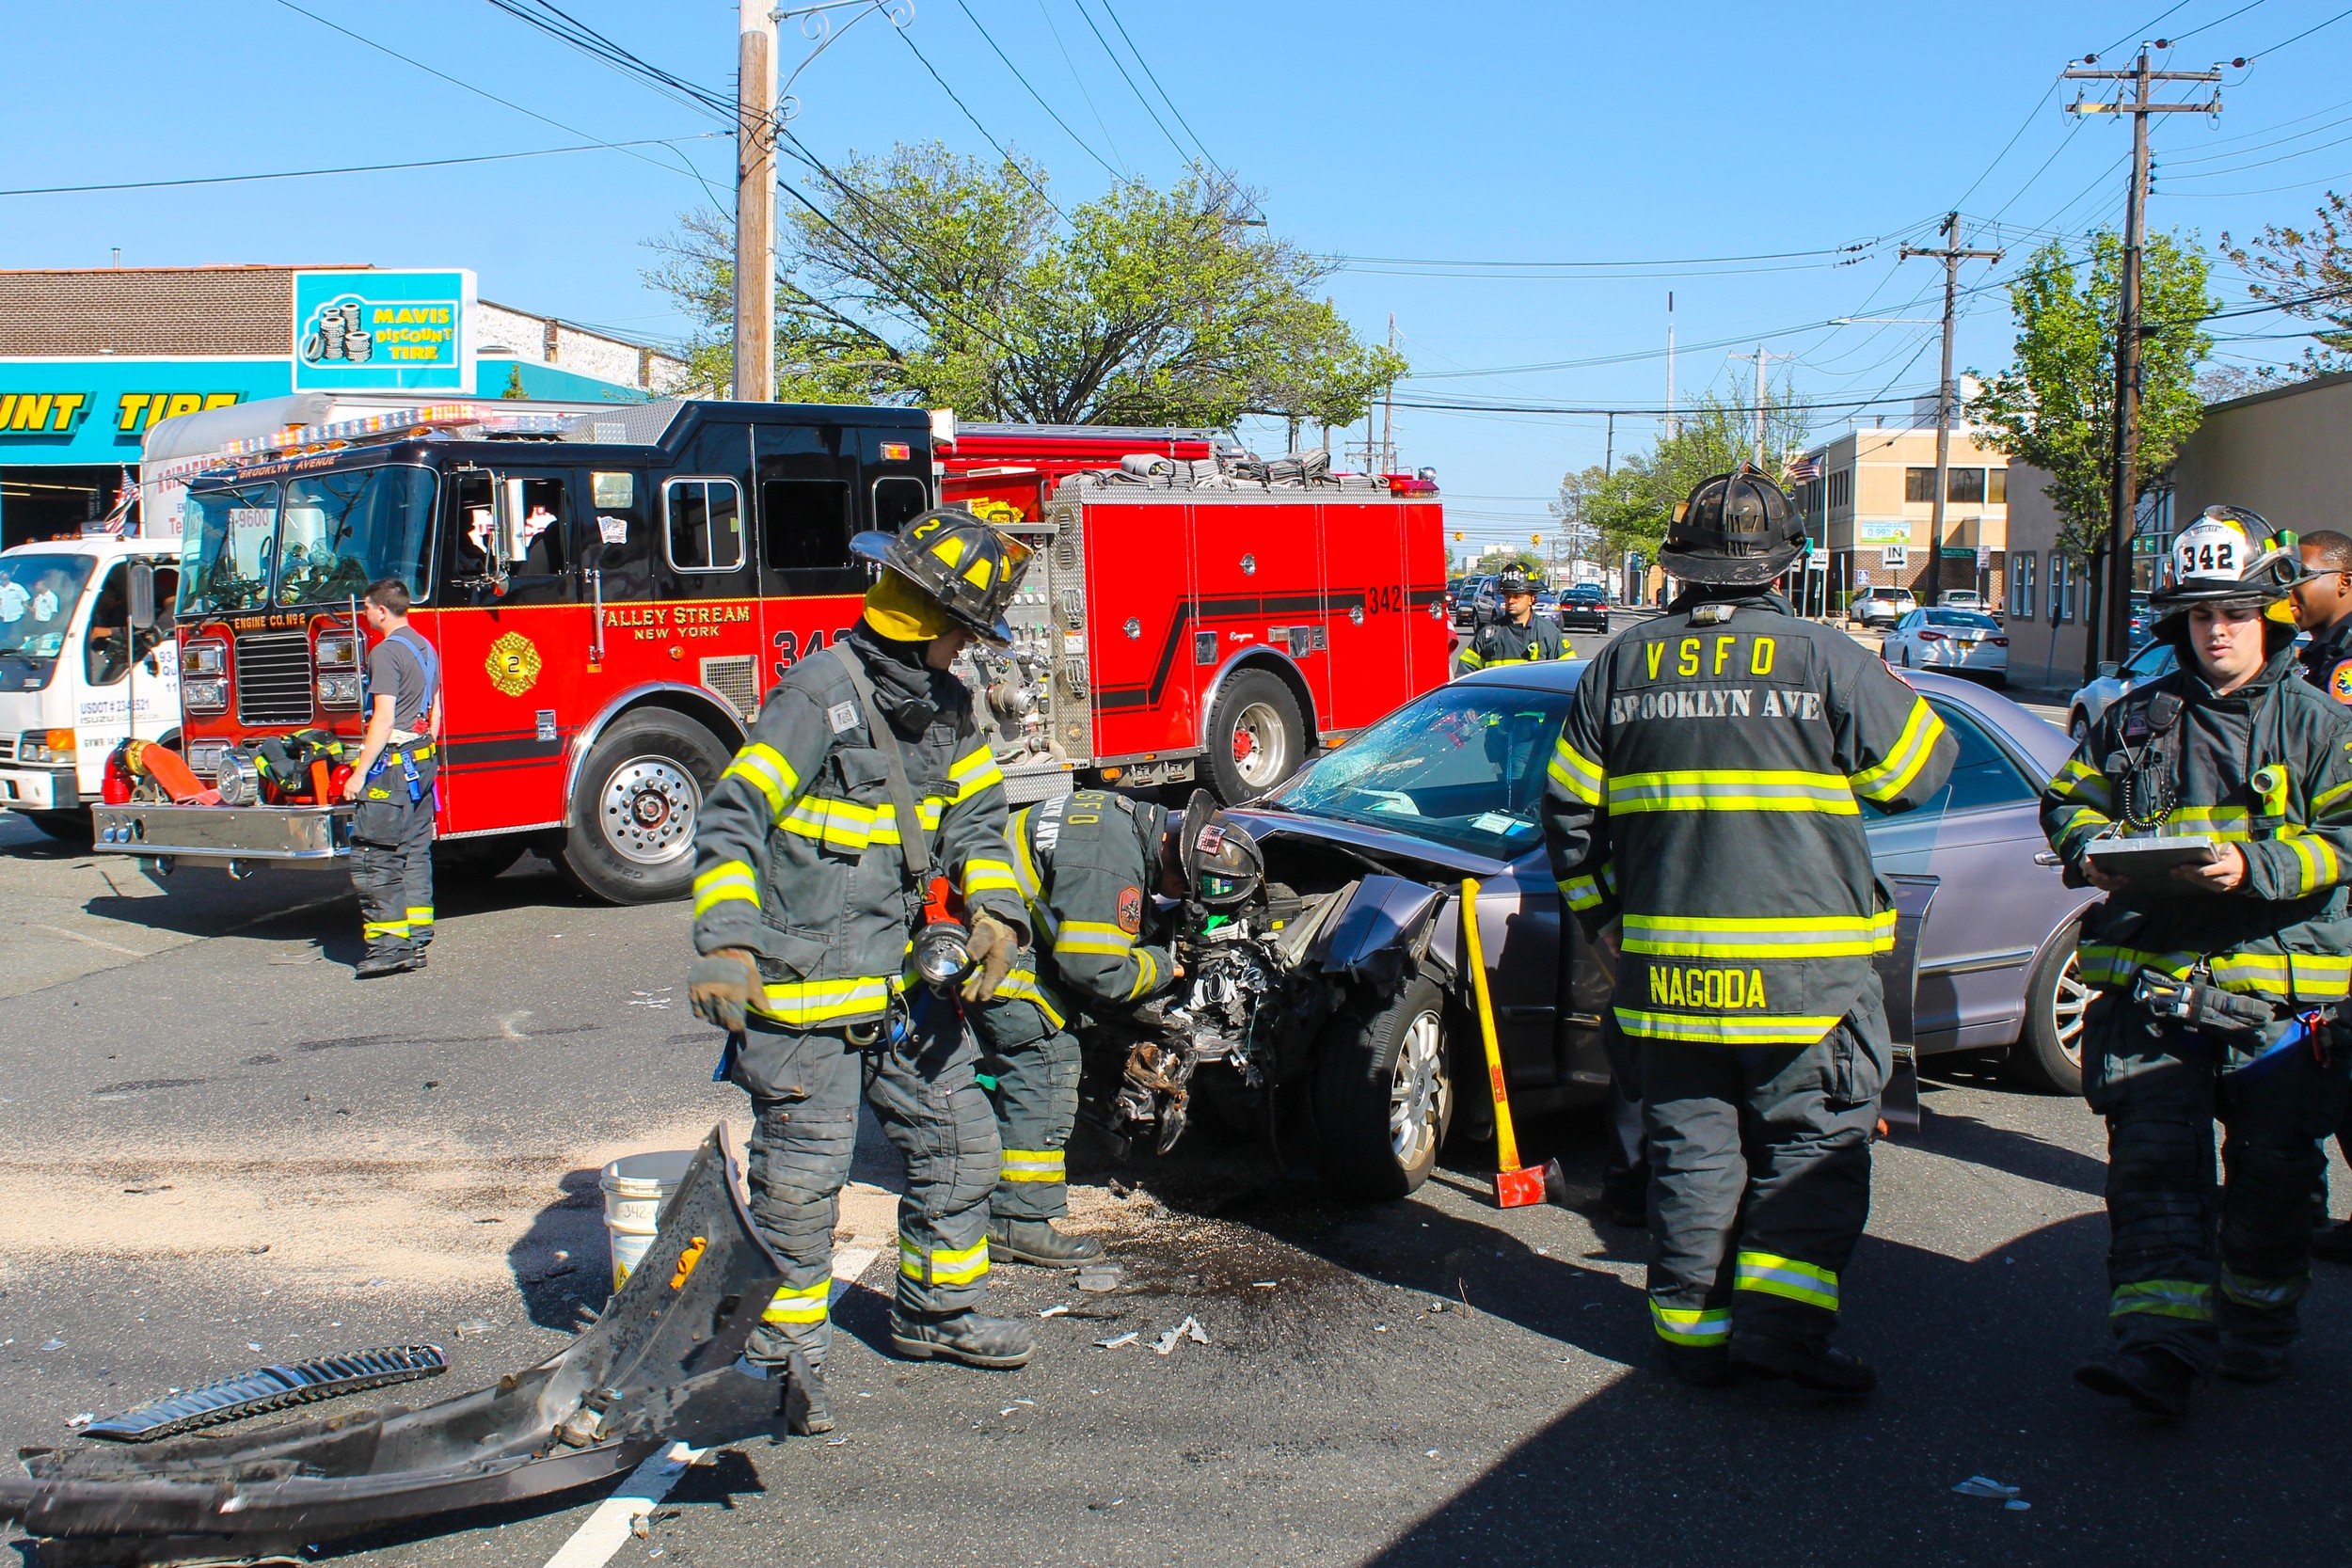 A crash on May 2 at the intersection of Merrick Road and Railroad Avenue in Valley Stream sent one driver to the hospital, according to first responders.